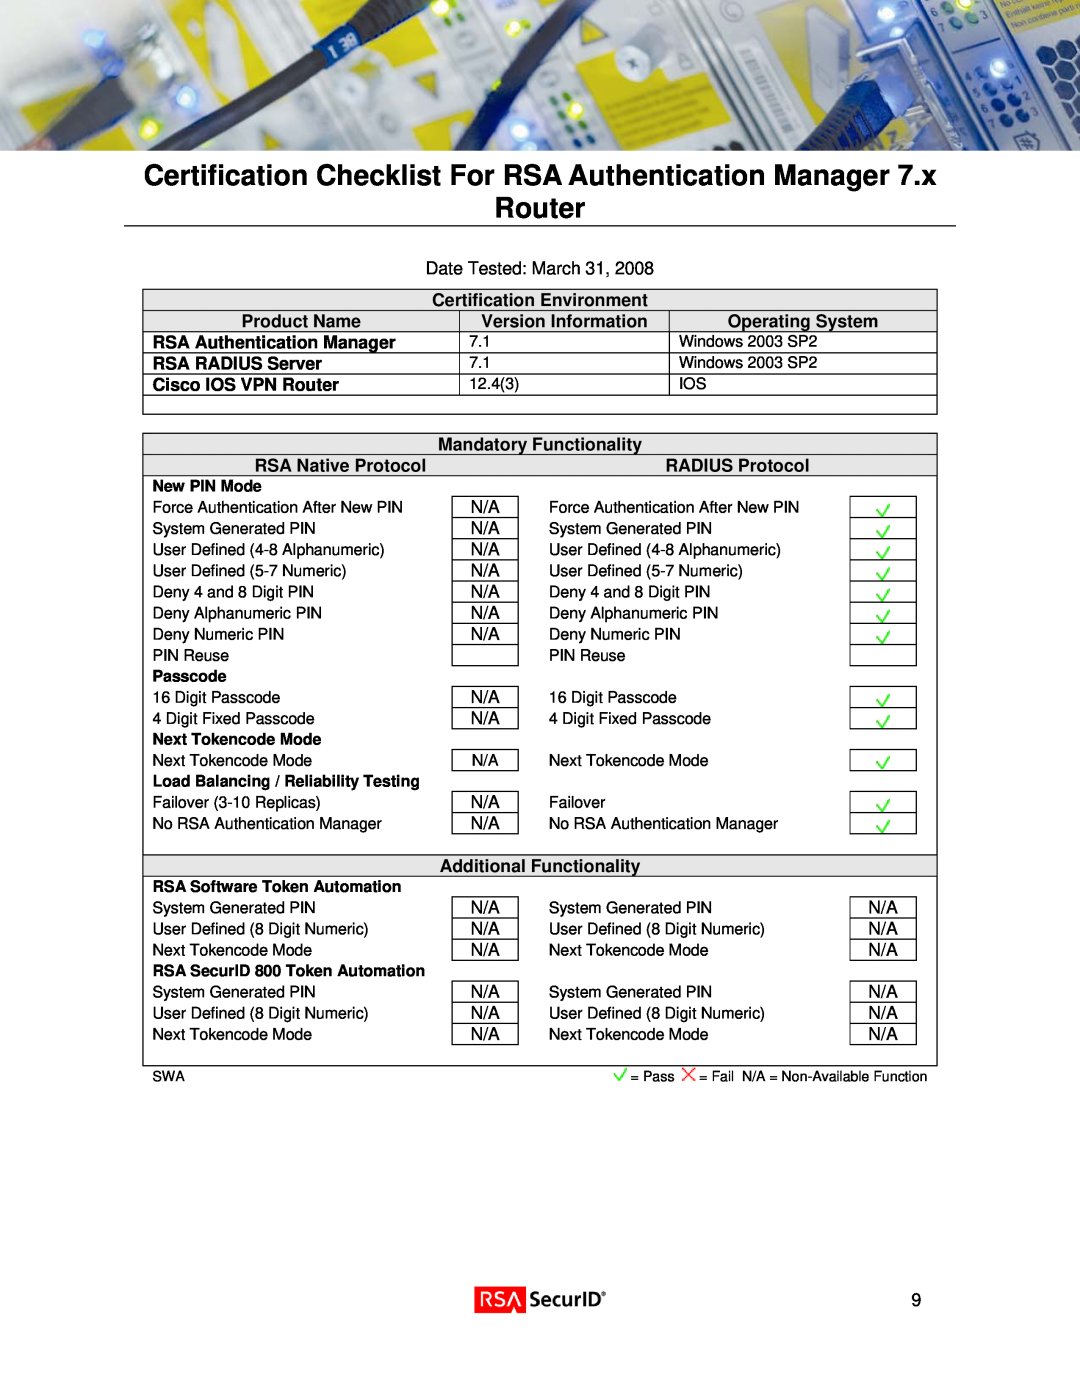 Cisco Systems IOS Router manual Certification Checklist For RSA Authentication Manager Router 